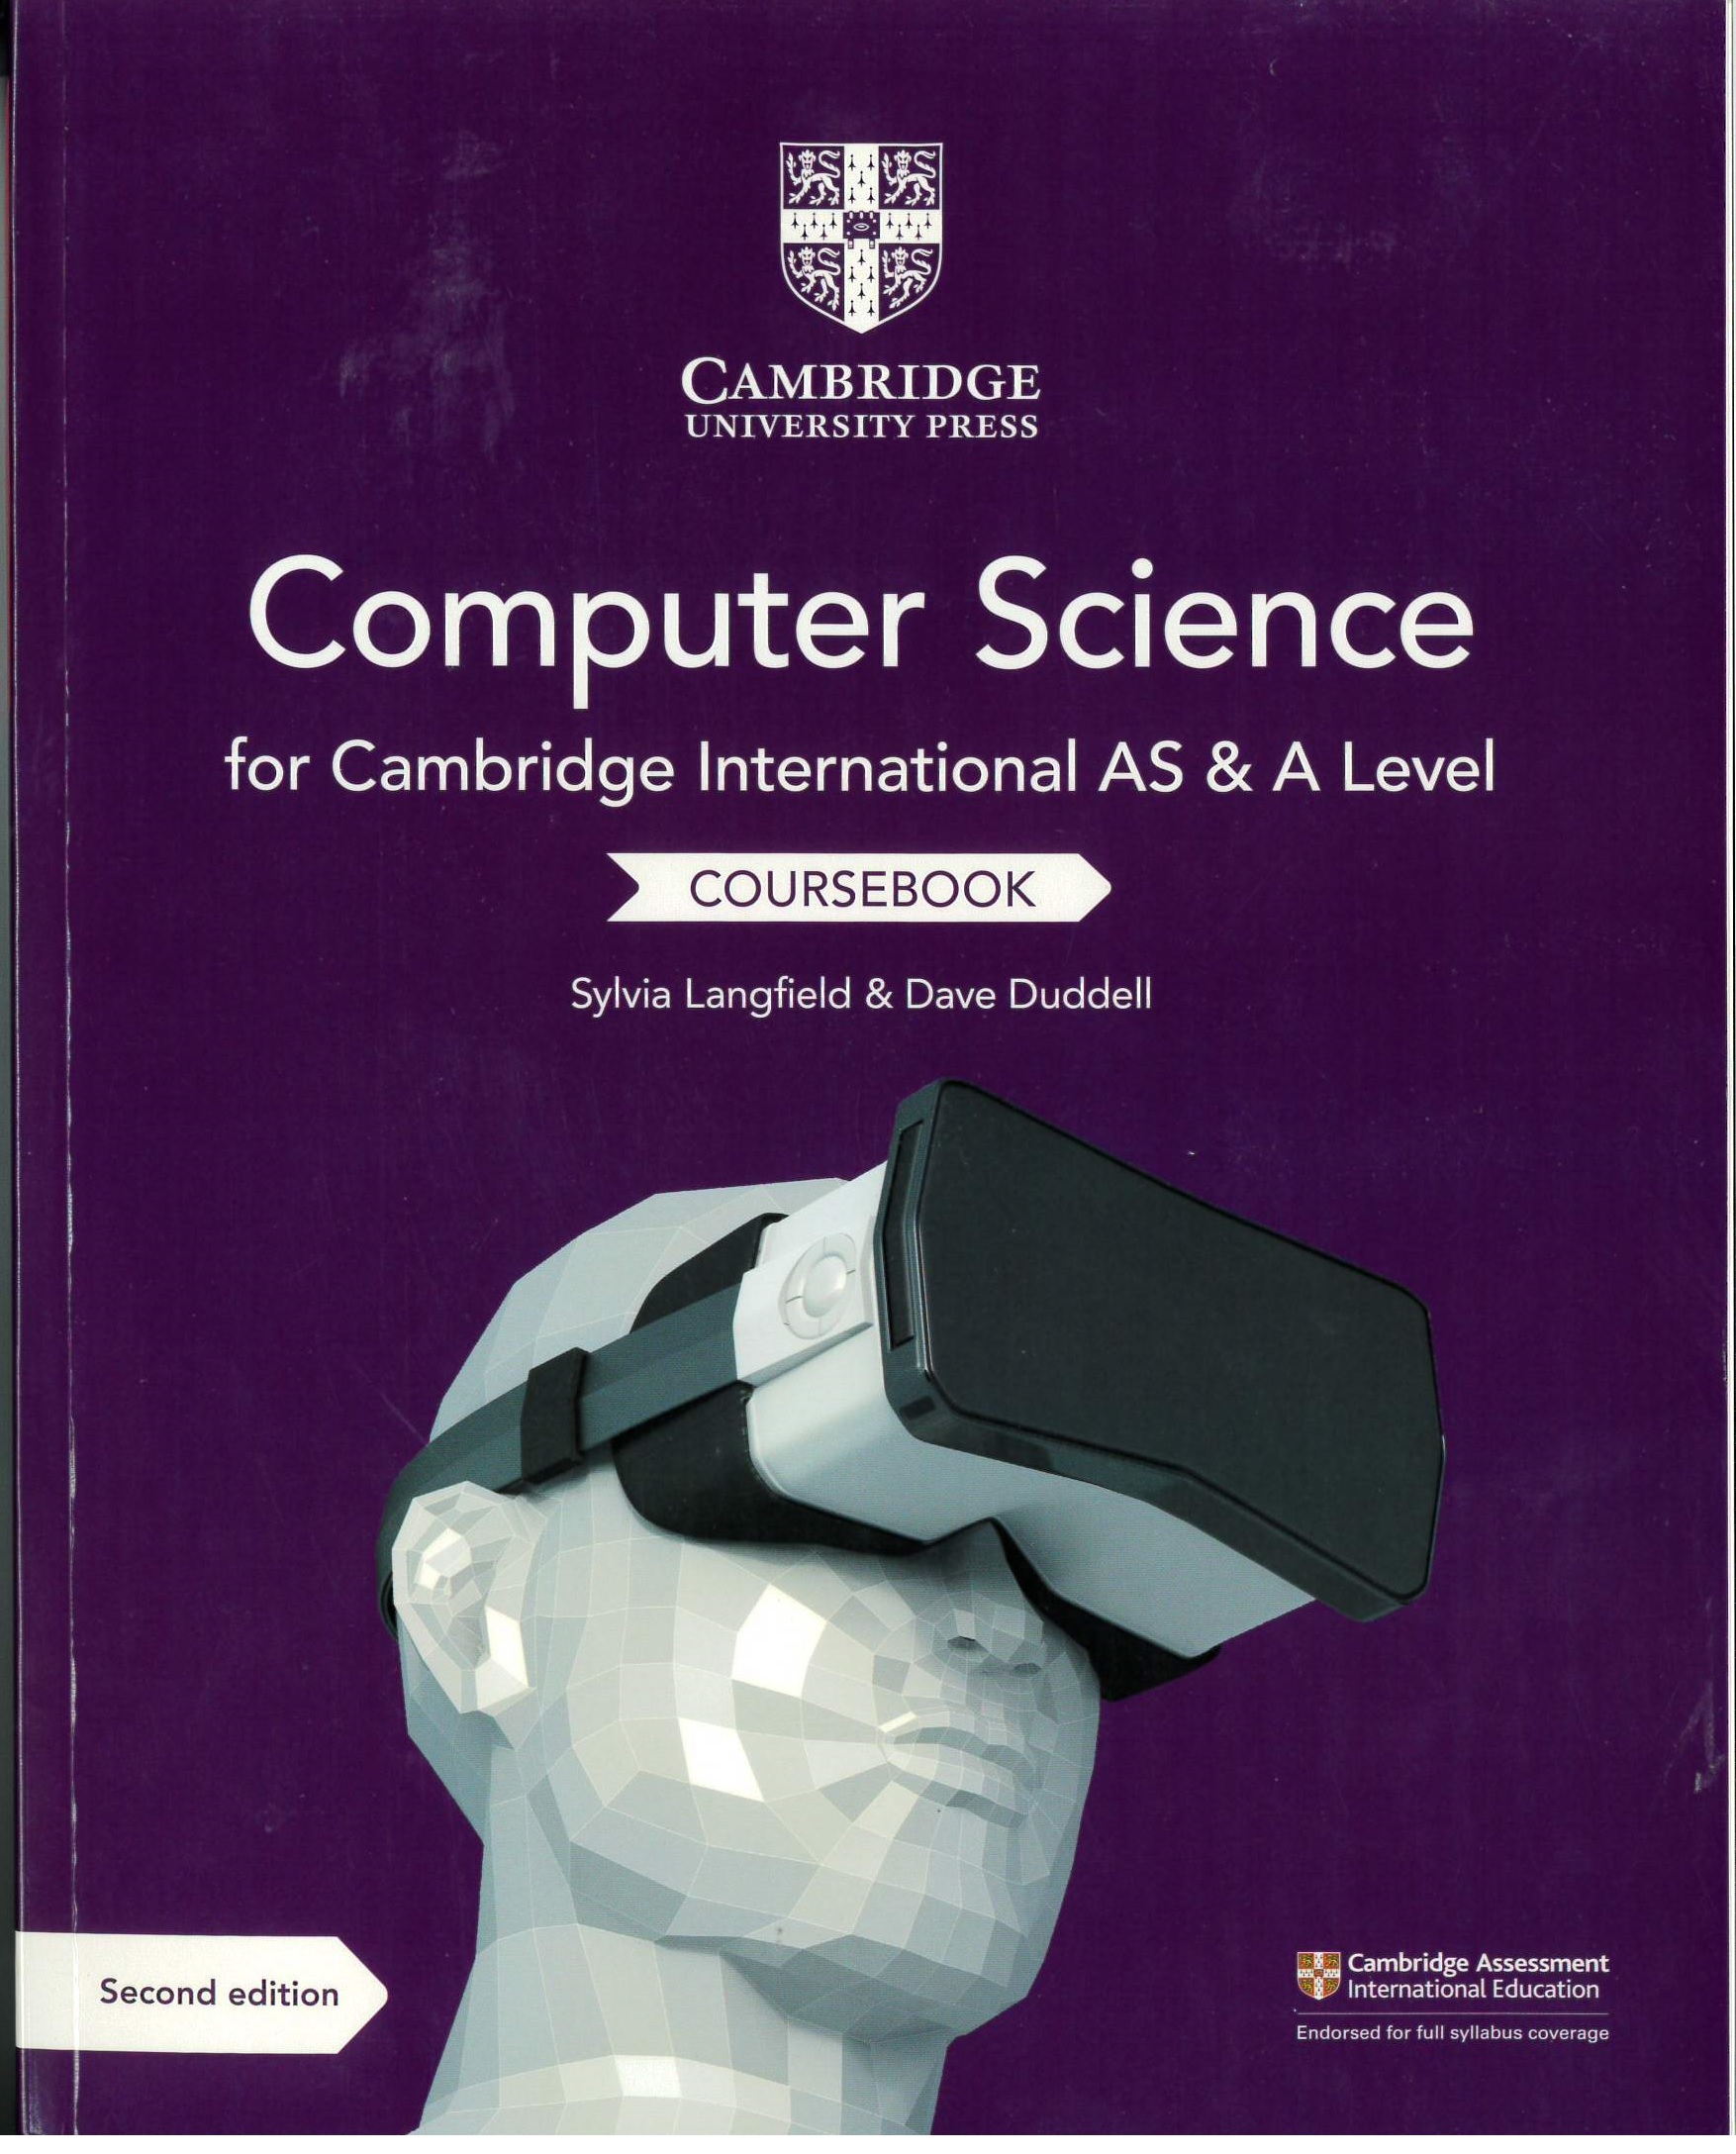 Computer science for Cambridge international AS and A level. Coursebook